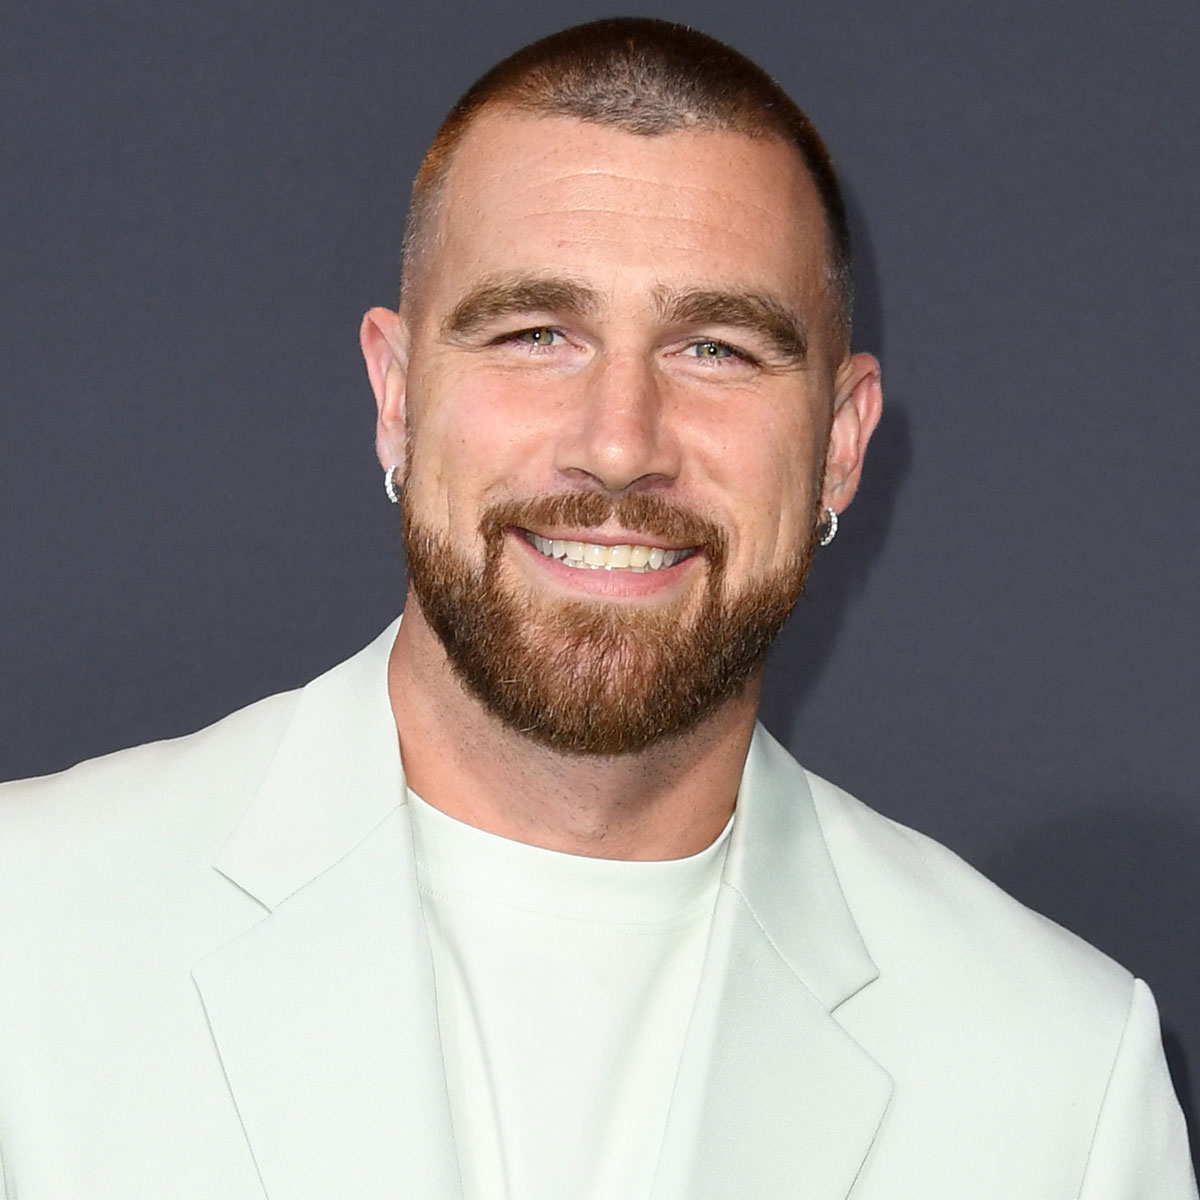 Travis Kelce's Shirtless Spa Video Resurfaces -- and It's Pretty